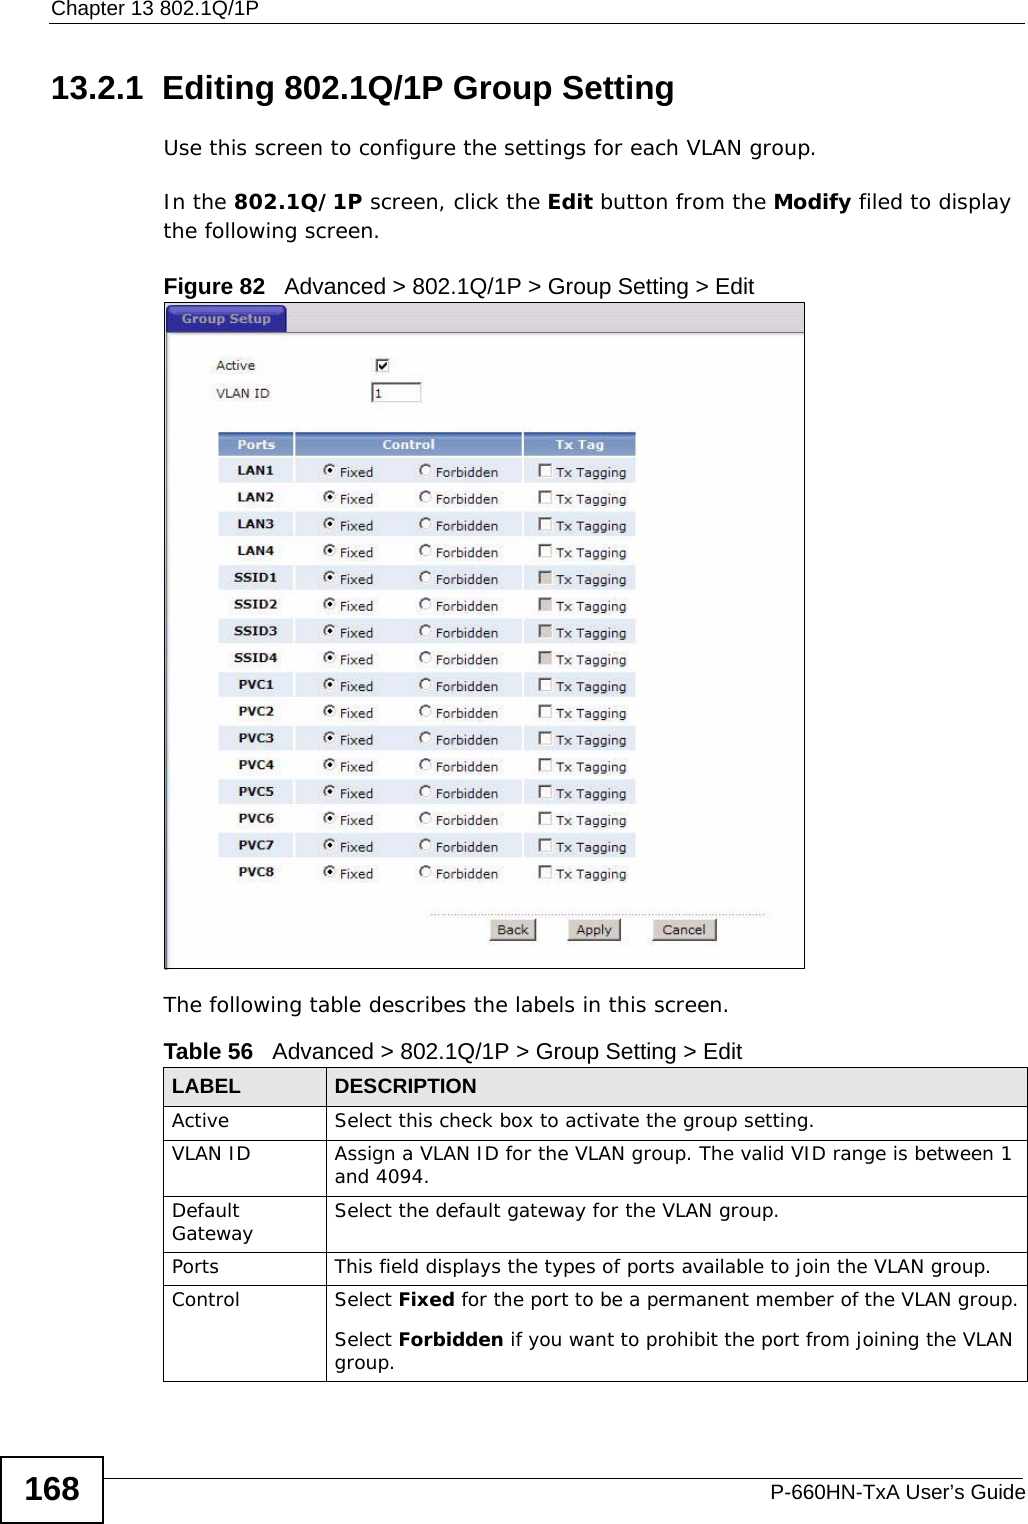 Chapter 13 802.1Q/1PP-660HN-TxA User’s Guide16813.2.1  Editing 802.1Q/1P Group SettingUse this screen to configure the settings for each VLAN group.In the 802.1Q/1P screen, click the Edit button from the Modify filed to display the following screen.Figure 82   Advanced &gt; 802.1Q/1P &gt; Group Setting &gt; EditThe following table describes the labels in this screen.  Table 56   Advanced &gt; 802.1Q/1P &gt; Group Setting &gt; EditLABEL DESCRIPTIONActive Select this check box to activate the group setting.VLAN ID Assign a VLAN ID for the VLAN group. The valid VID range is between 1 and 4094.Default Gateway Select the default gateway for the VLAN group.Ports This field displays the types of ports available to join the VLAN group.Control Select Fixed for the port to be a permanent member of the VLAN group.Select Forbidden if you want to prohibit the port from joining the VLAN group.